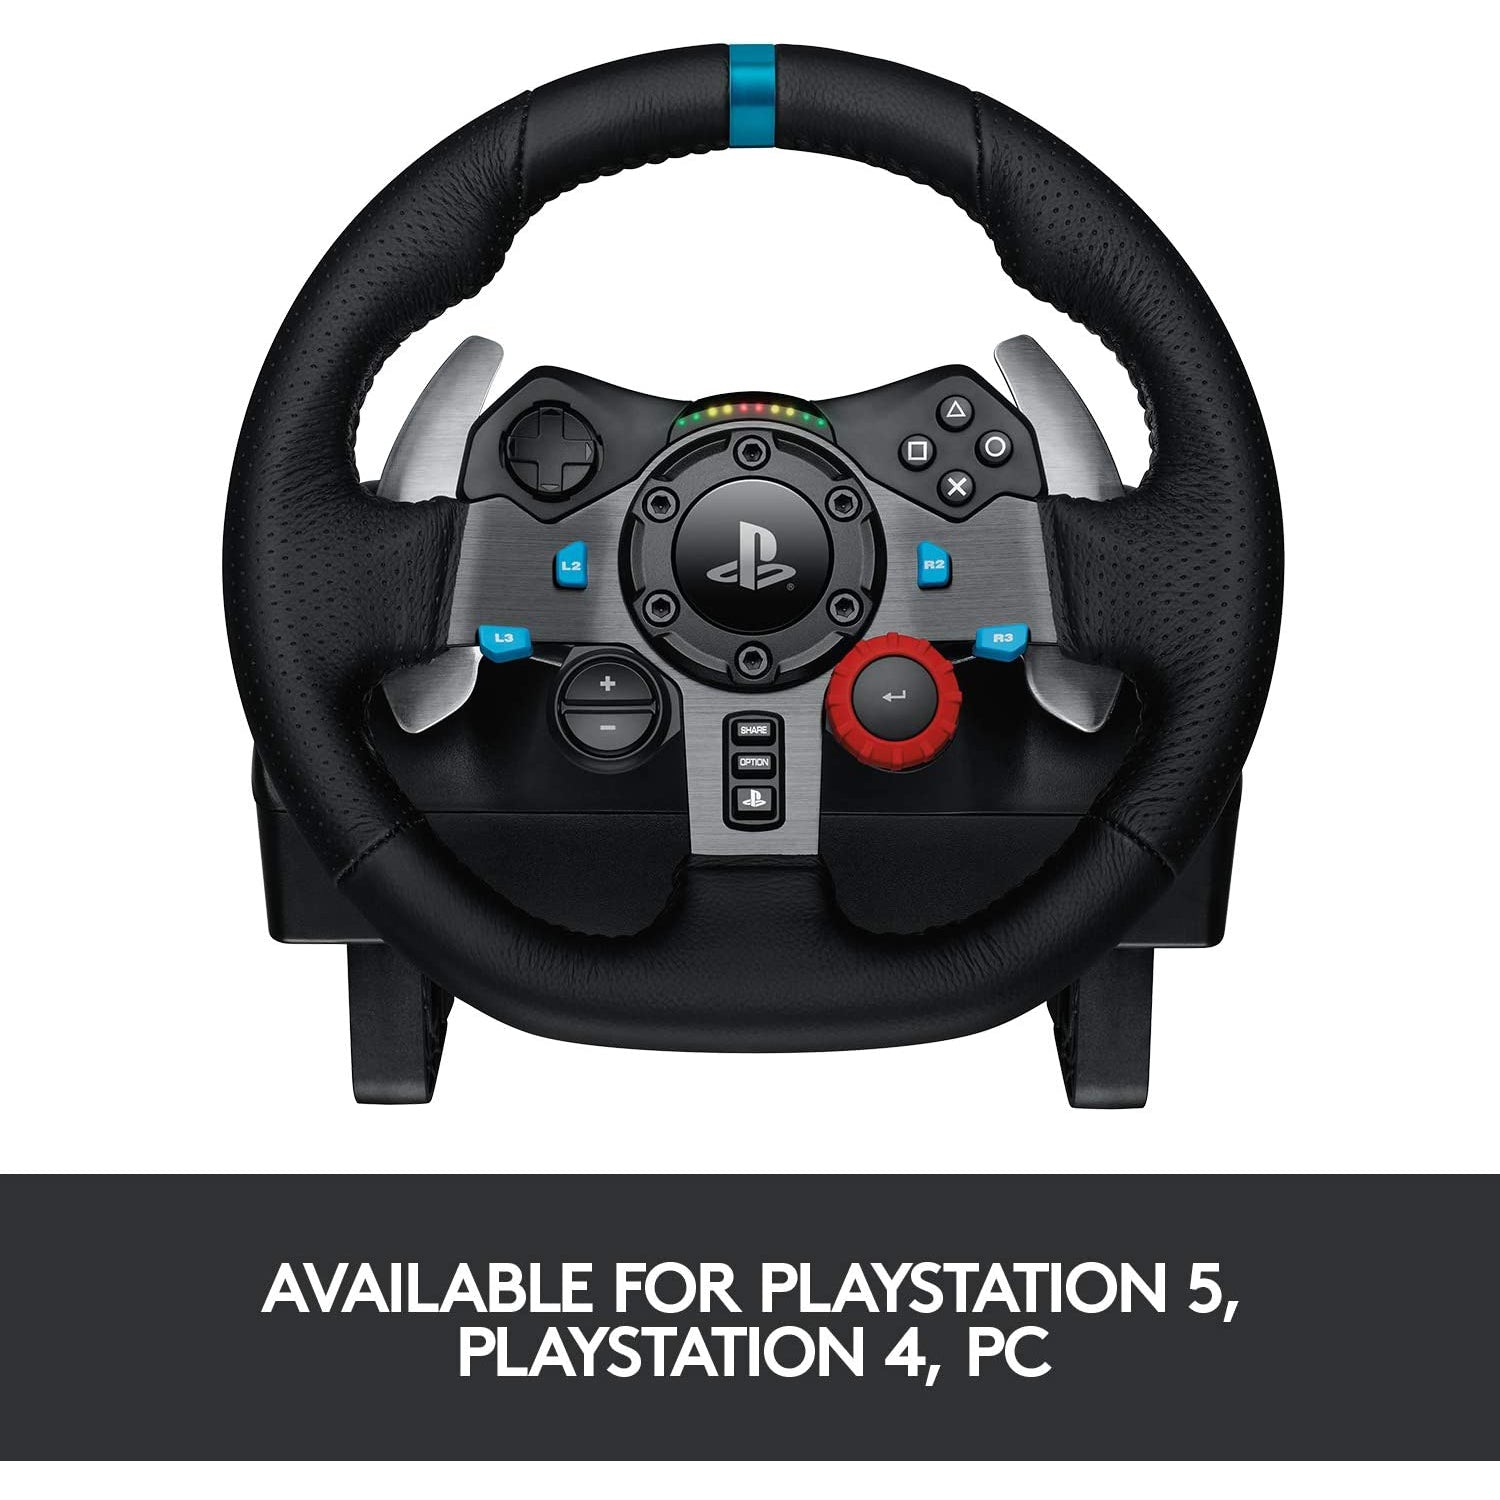 Logitech G29 Driving Force Racing Wheel and Floor Pedals for PlayStation and PC, Black - Refurbished Excellent